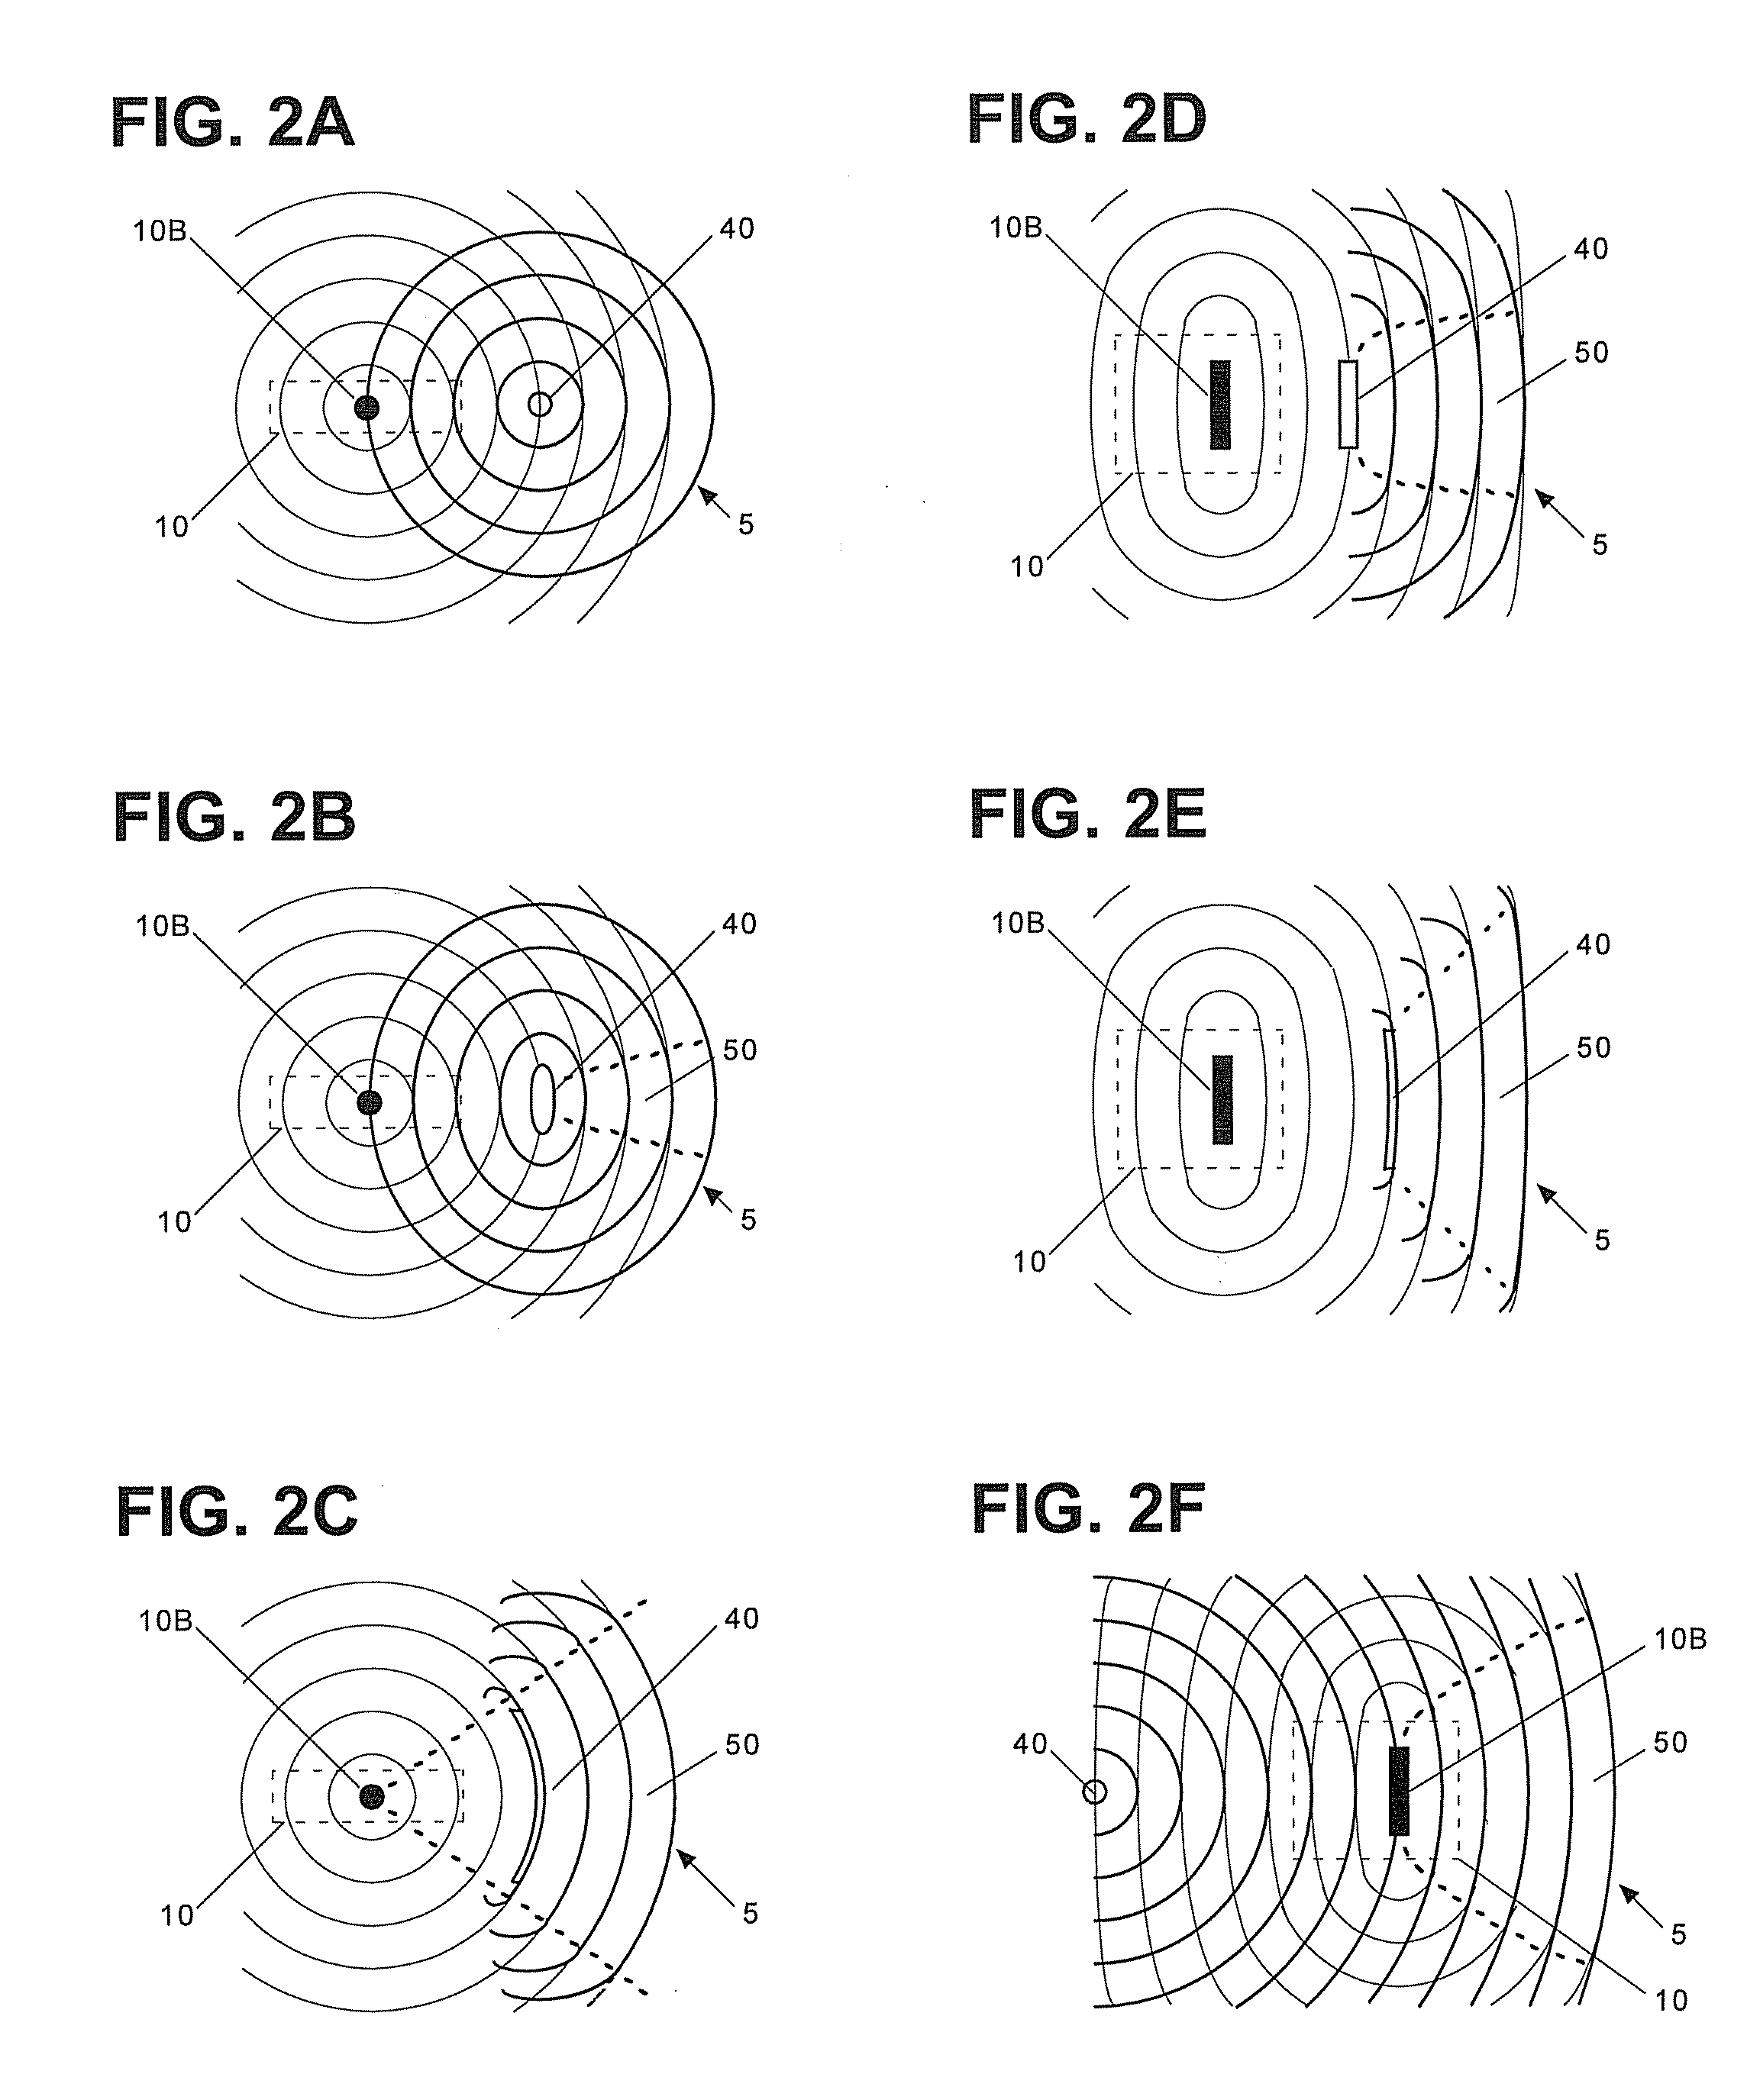 Electromagnetically-countered display systems and methods